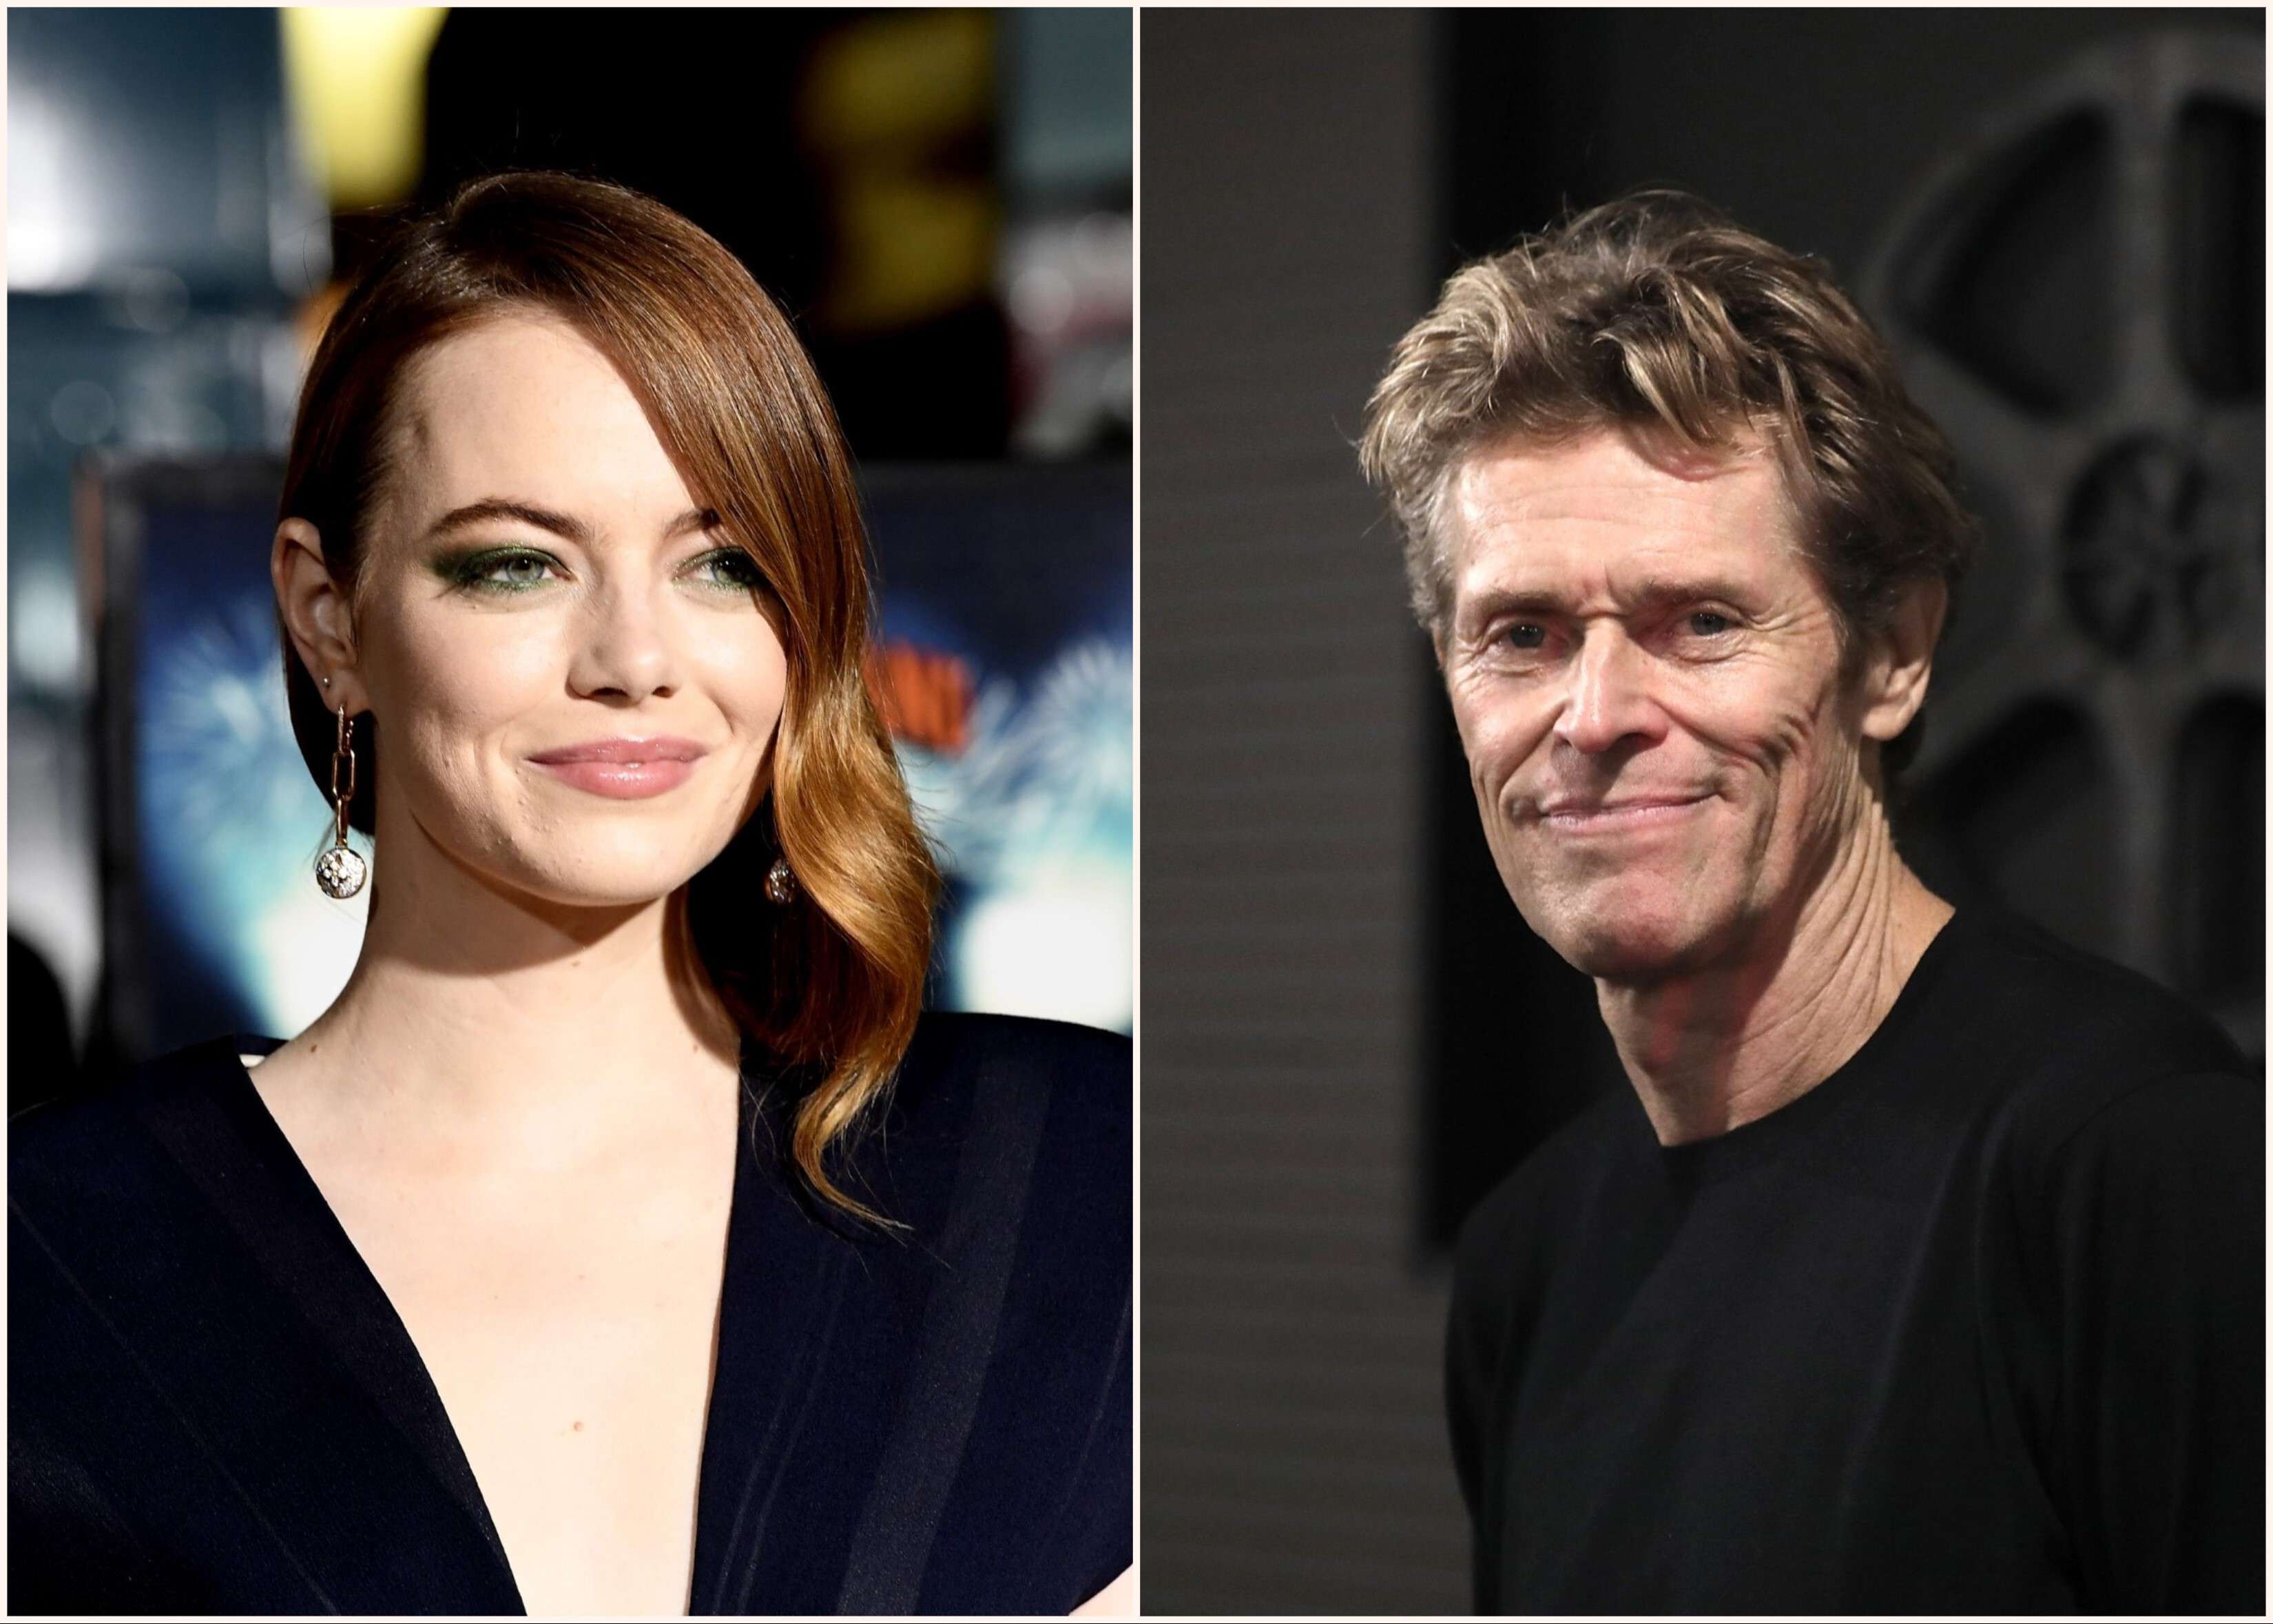 Willem Dafoe insisted Emma Stone slap him 20 times for their new movie